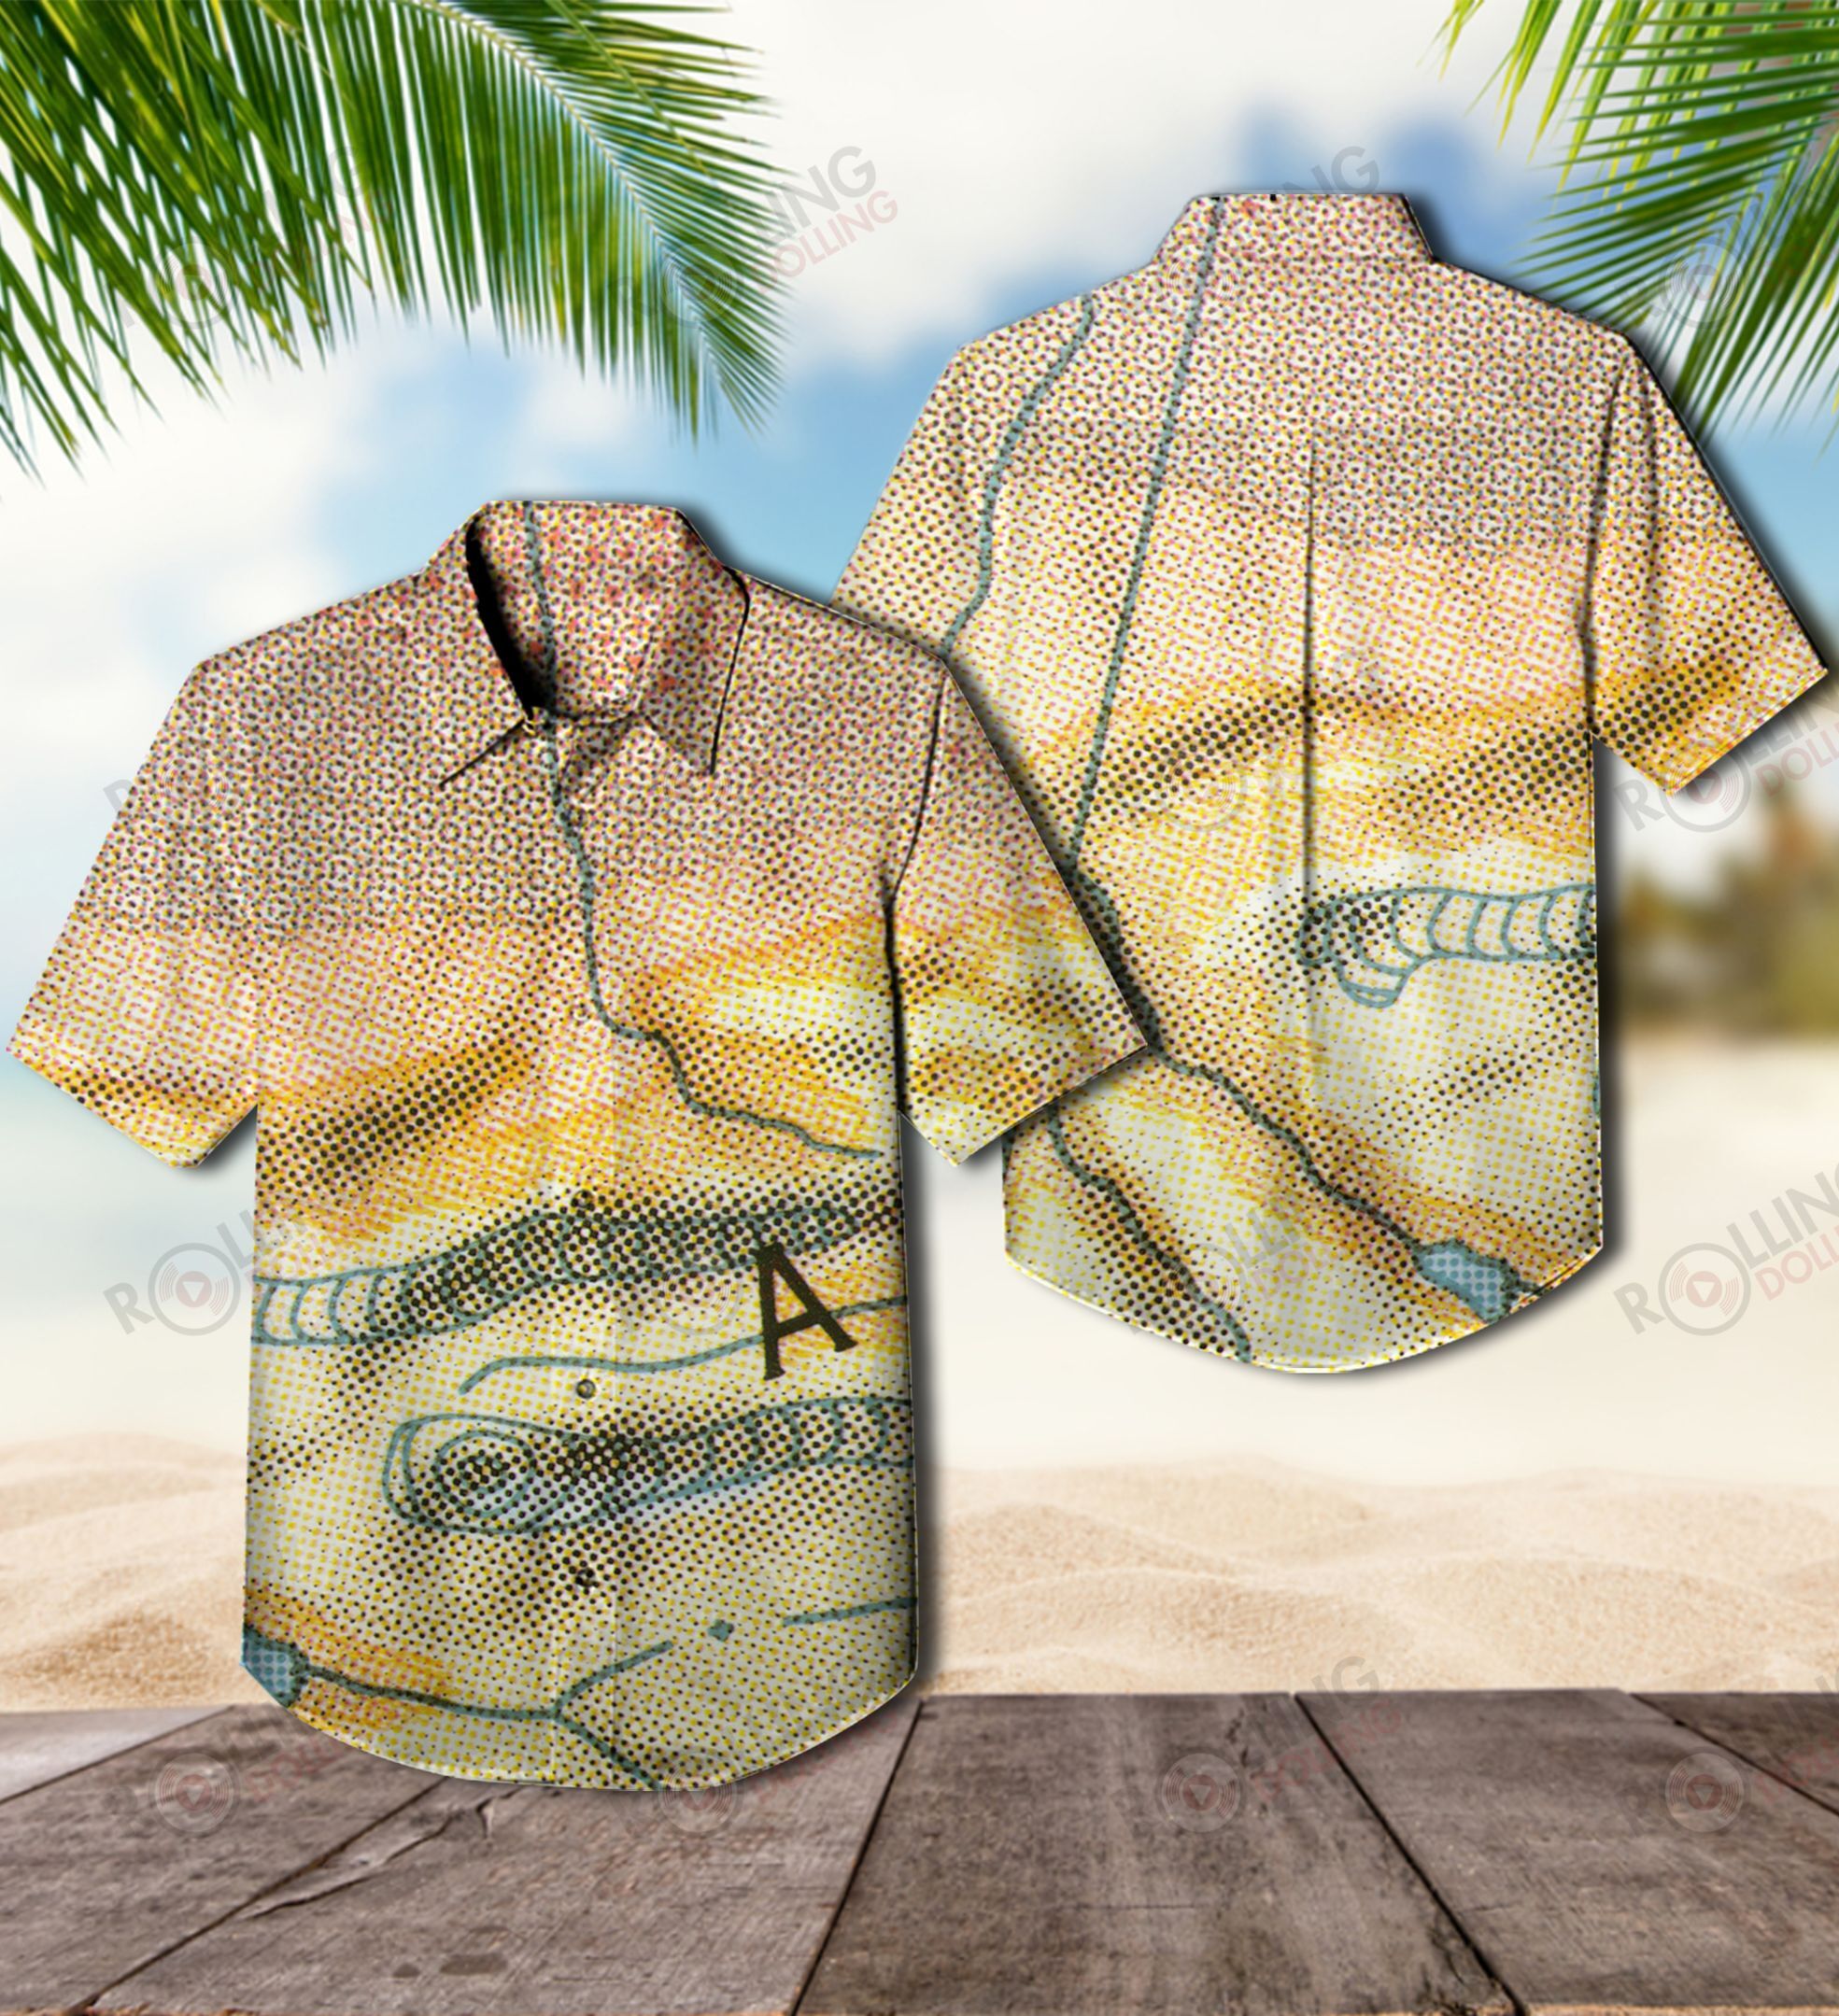 You'll have the perfect vacation outfit with this Hawaiian shirt 301